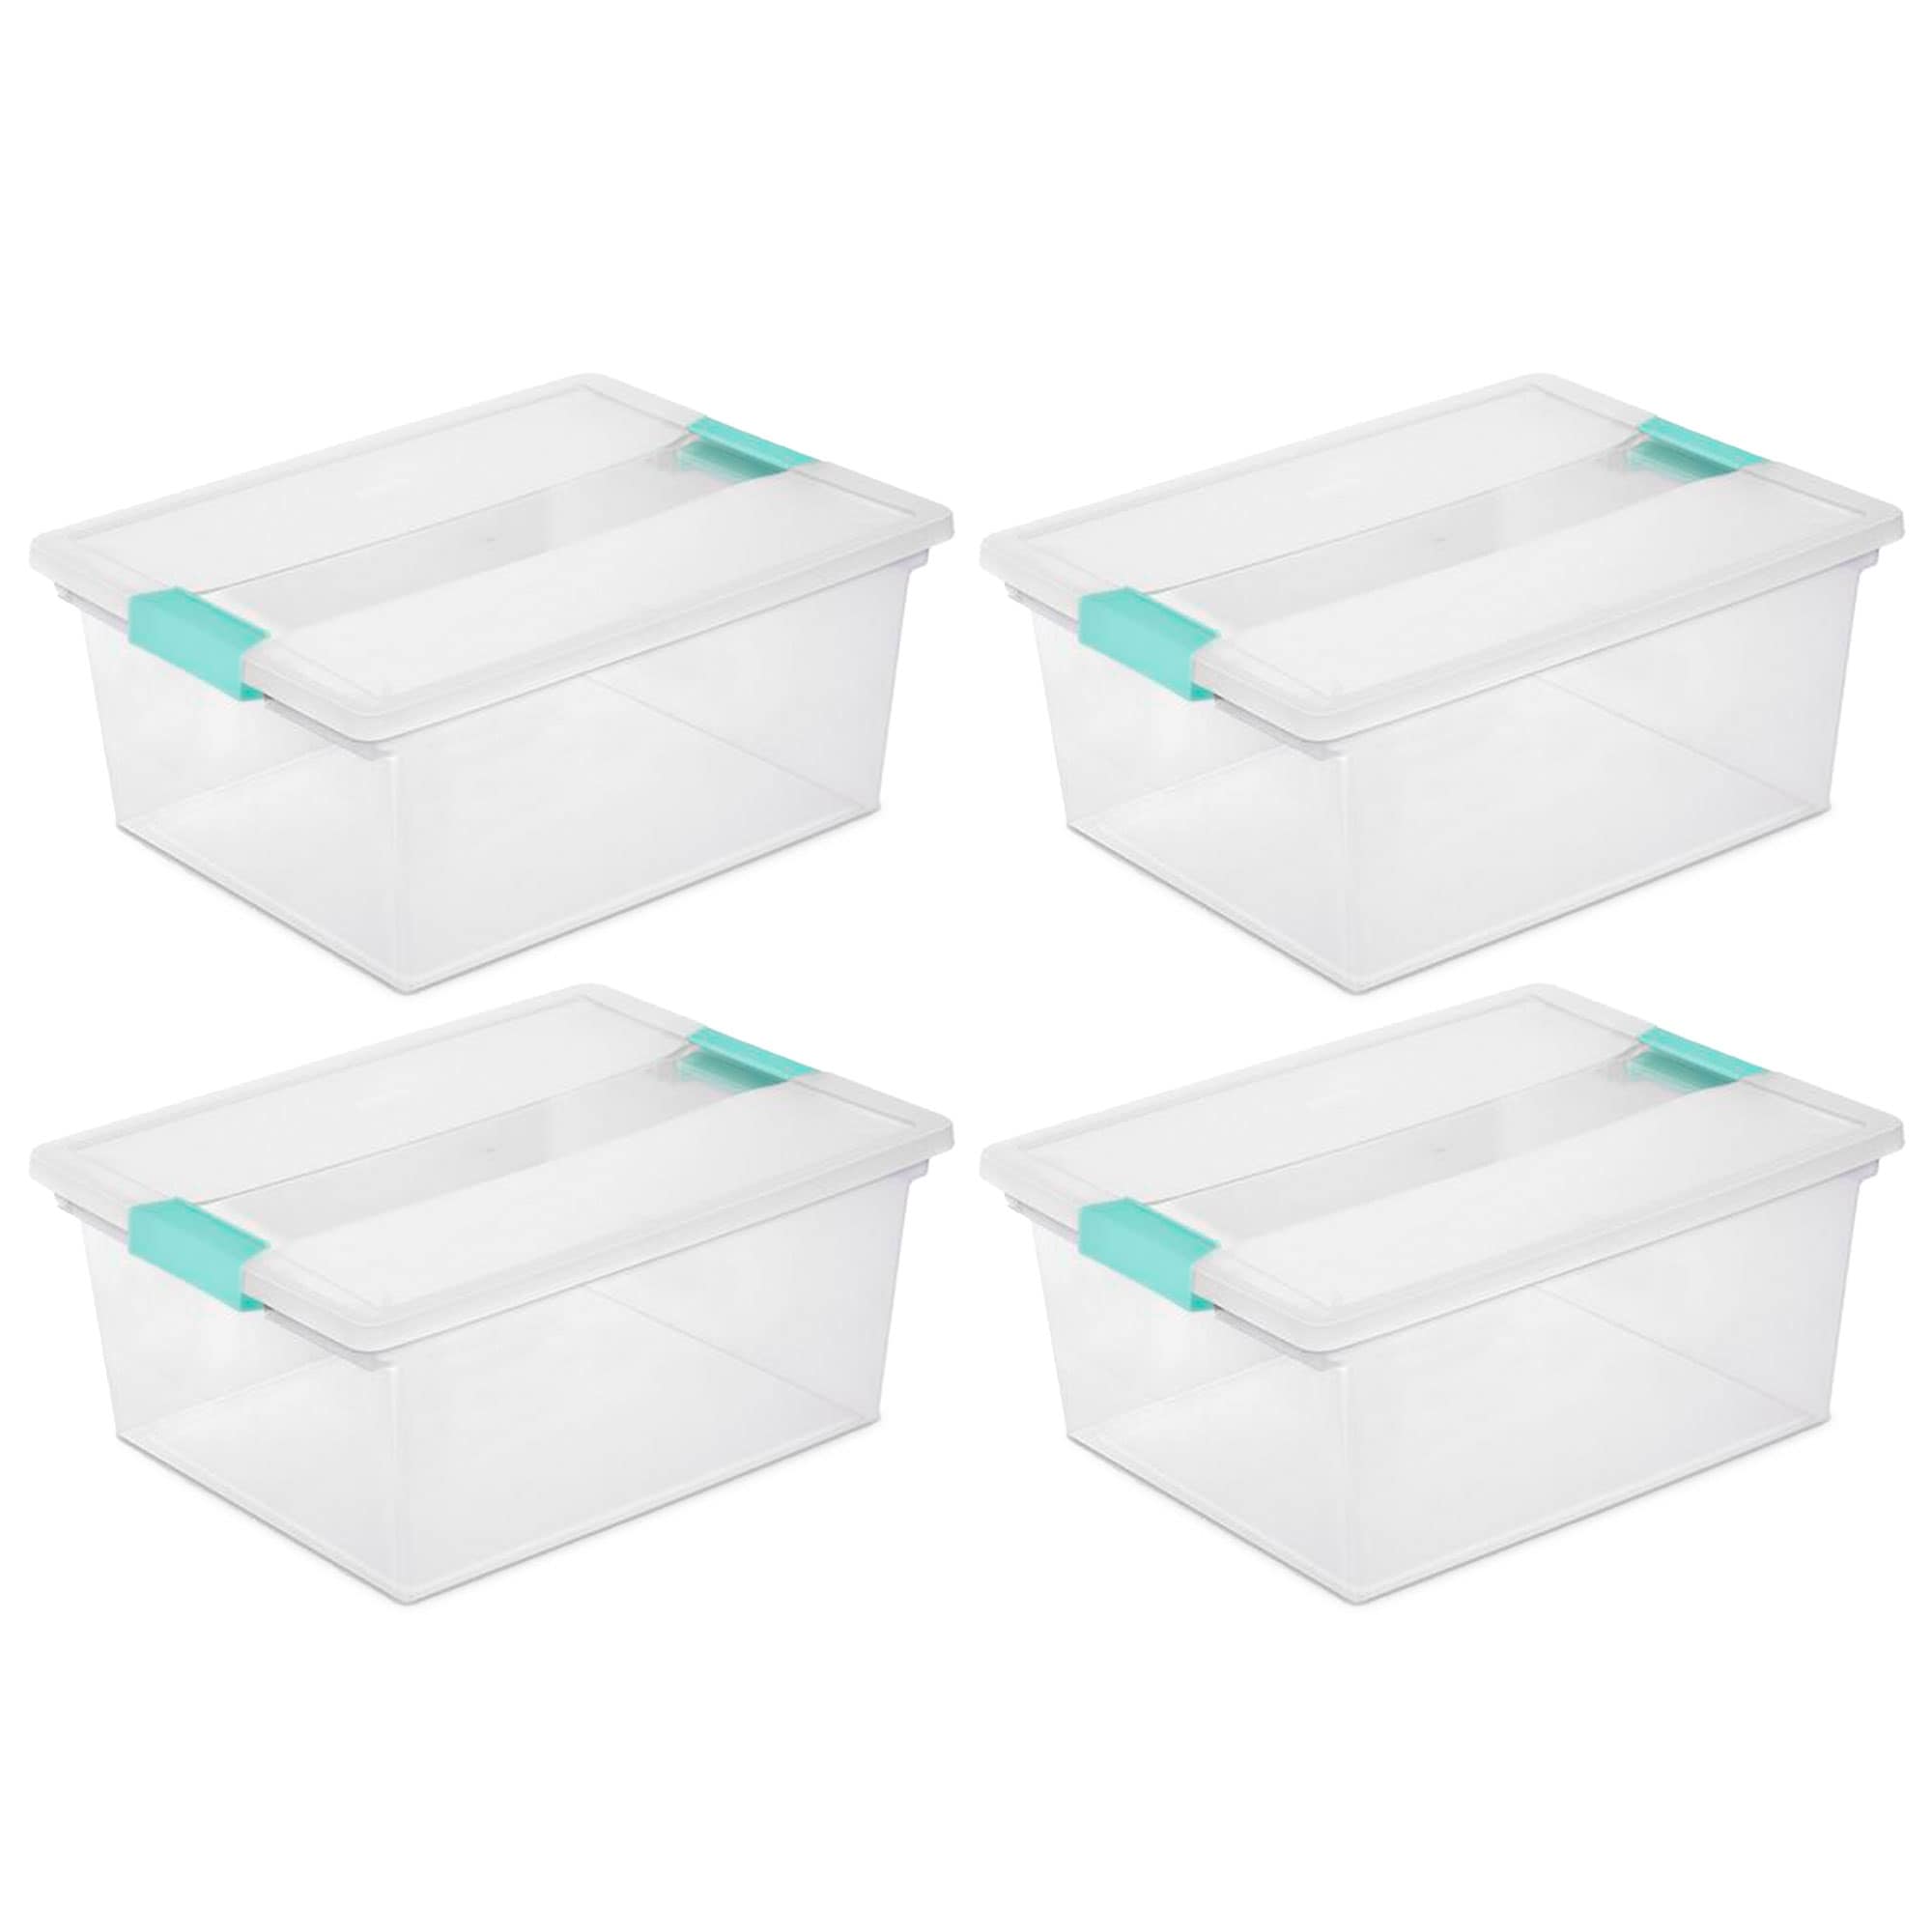 https://ak1.ostkcdn.com/images/products/is/images/direct/68ace7b25de42eaa068c57f451bc5d0dd4e907e9/Sterilite-Deep-Plastic-Stackable-Storage-Bin-w--Clear-Latch-Lid%2C-Clear-%284-Pack%29.jpg